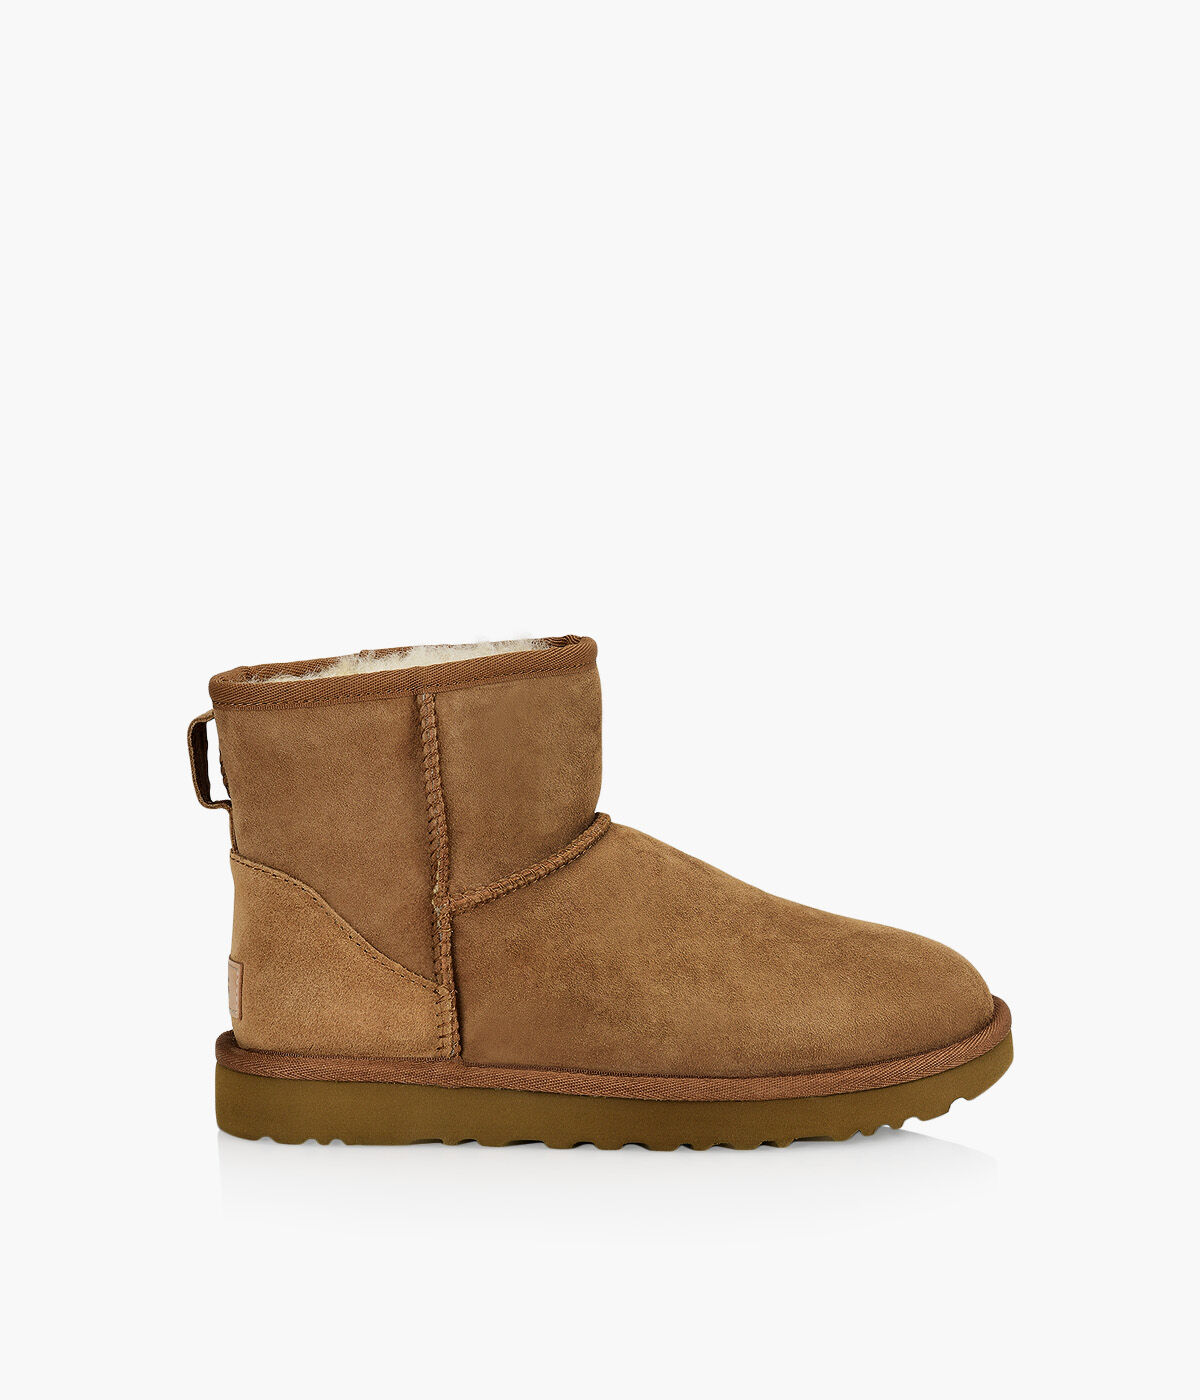 UGG CLASSIC MINI II - Suede | Browns Shoes